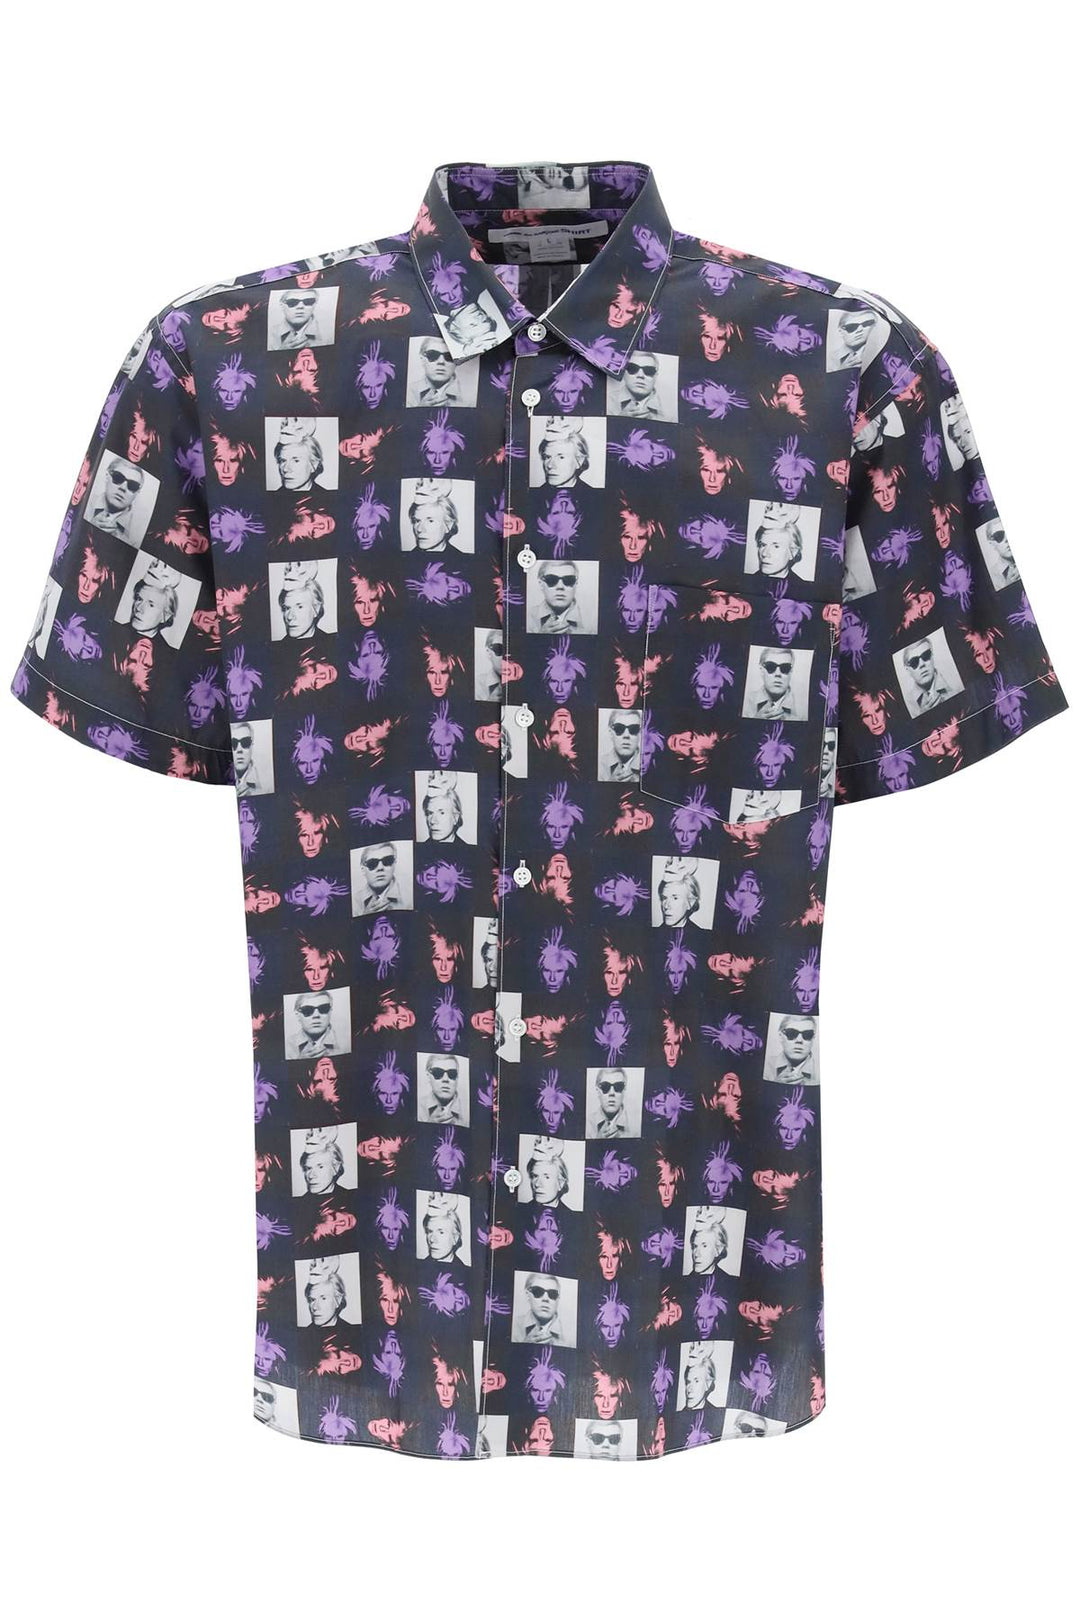 Comme Des Garcons Shirt Short Sleeved Shirt With Andy Warhol Print   Rosa